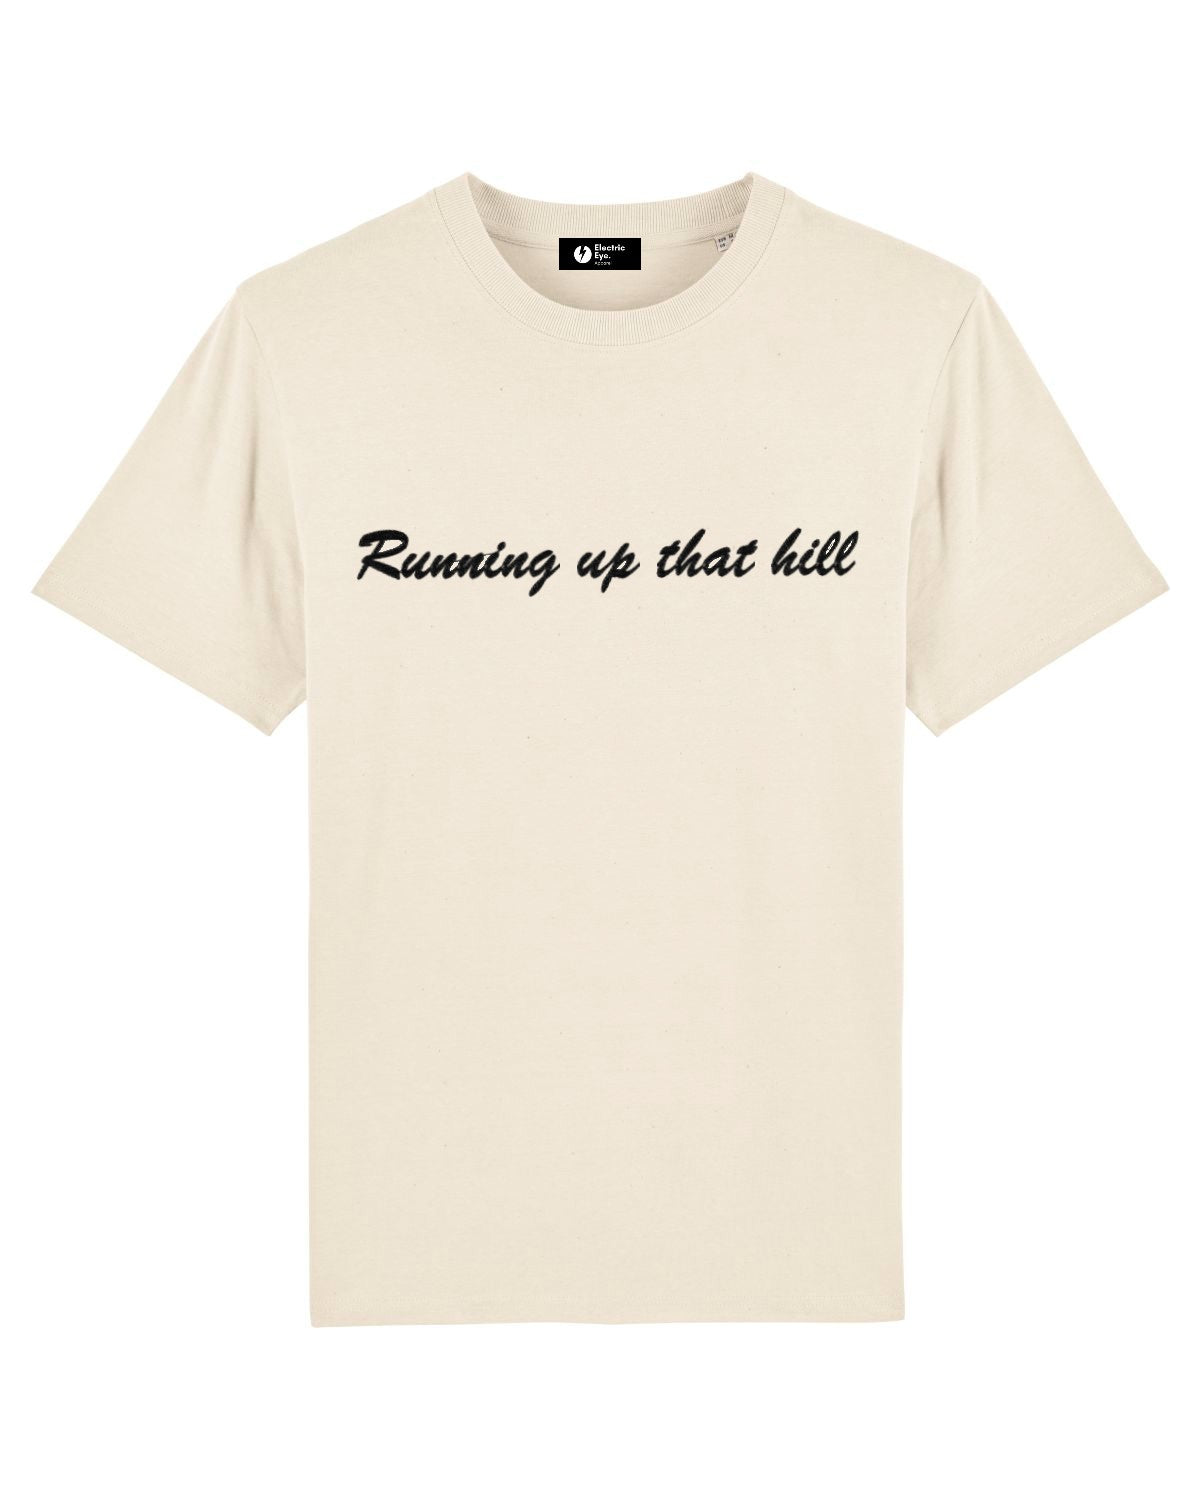 'RUNNING UP THAT HILL' EMBROIDERED UNISEX GARMENT DYED ORGANIC COTTON 'CREATOR VINTAGE' T-SHIRT - optional thread colour